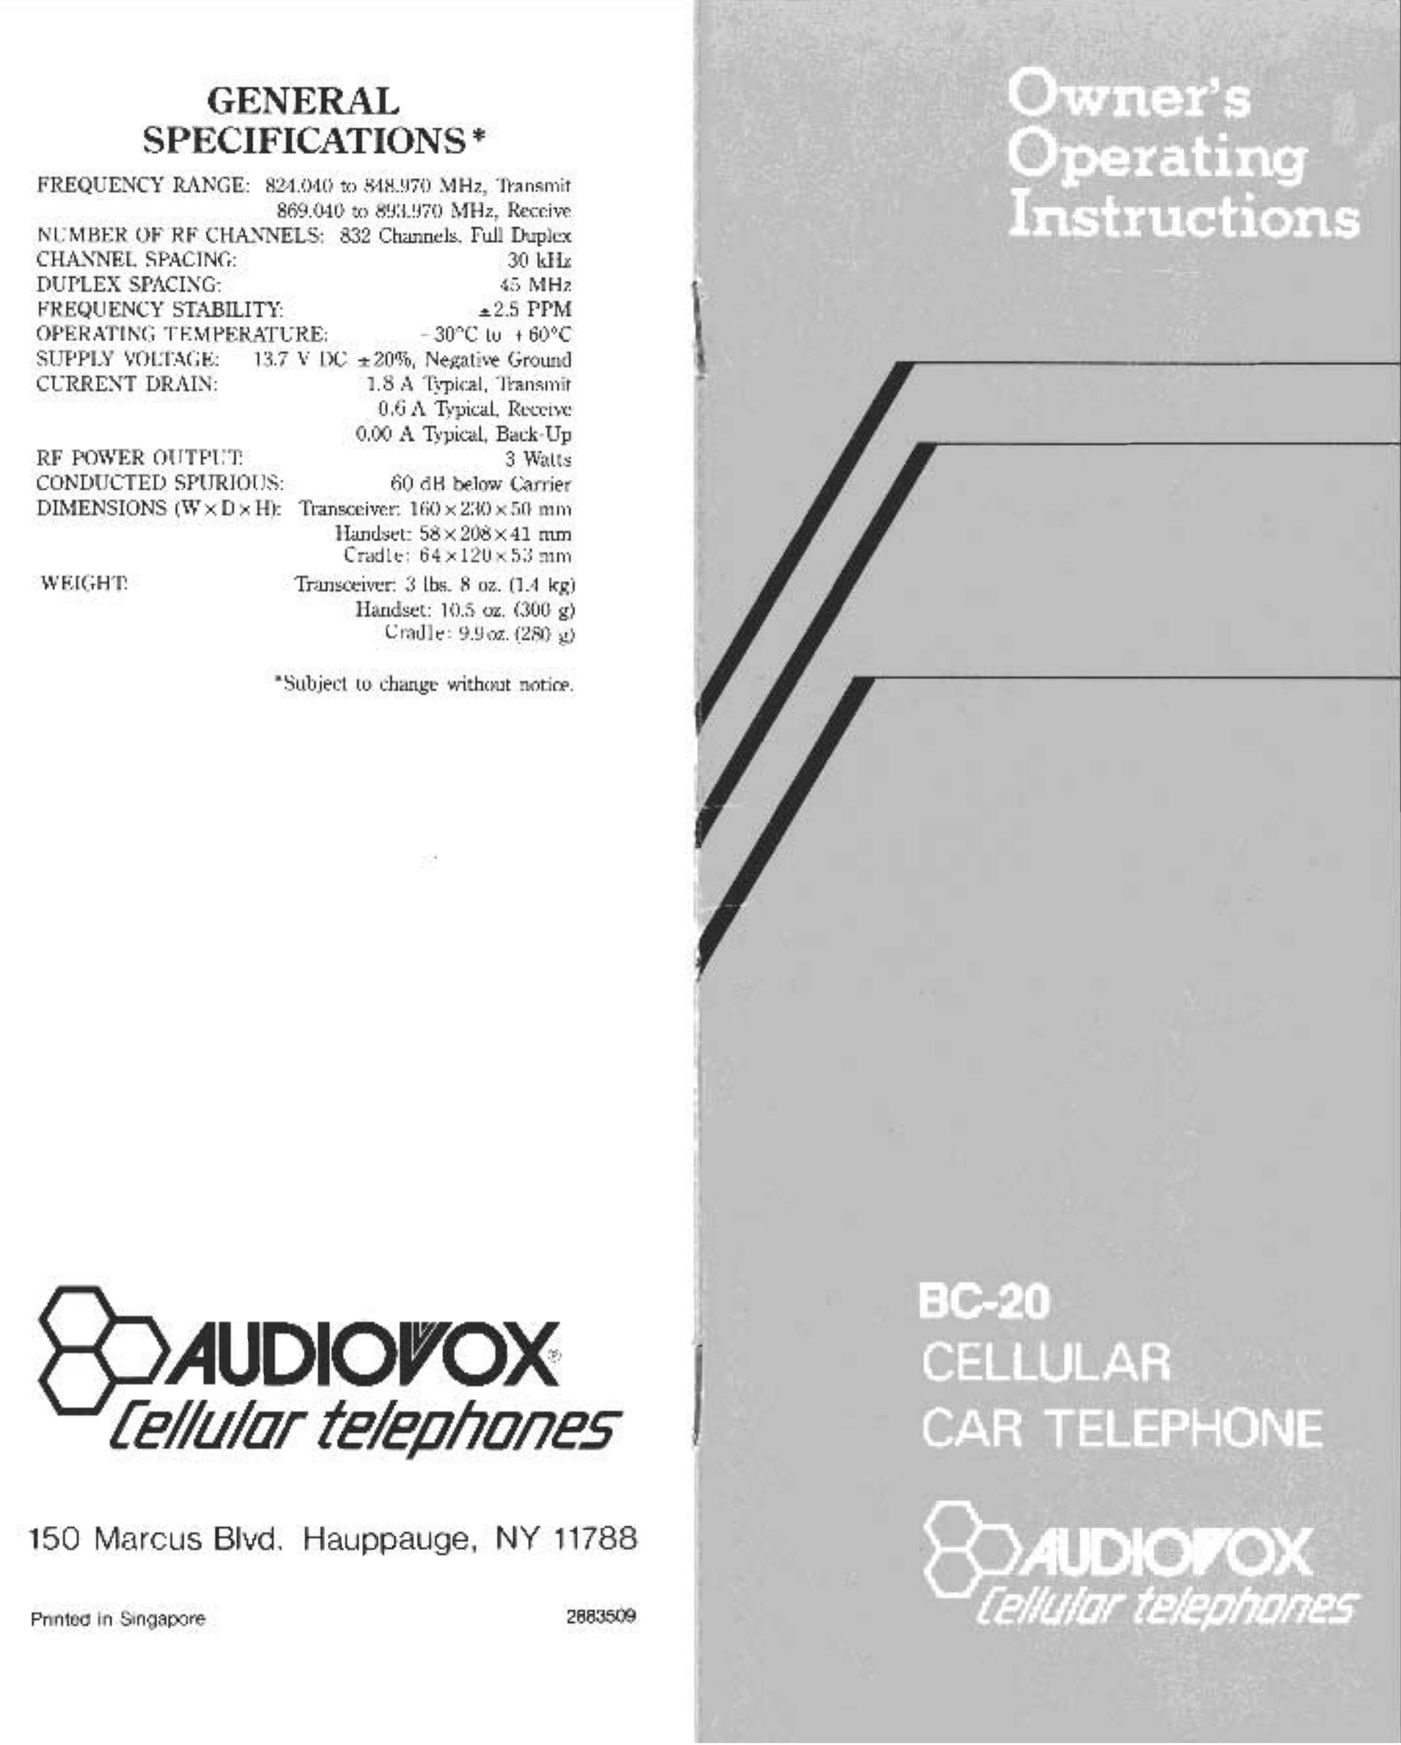 Audiovox BC-20 Cell Phone User Manual